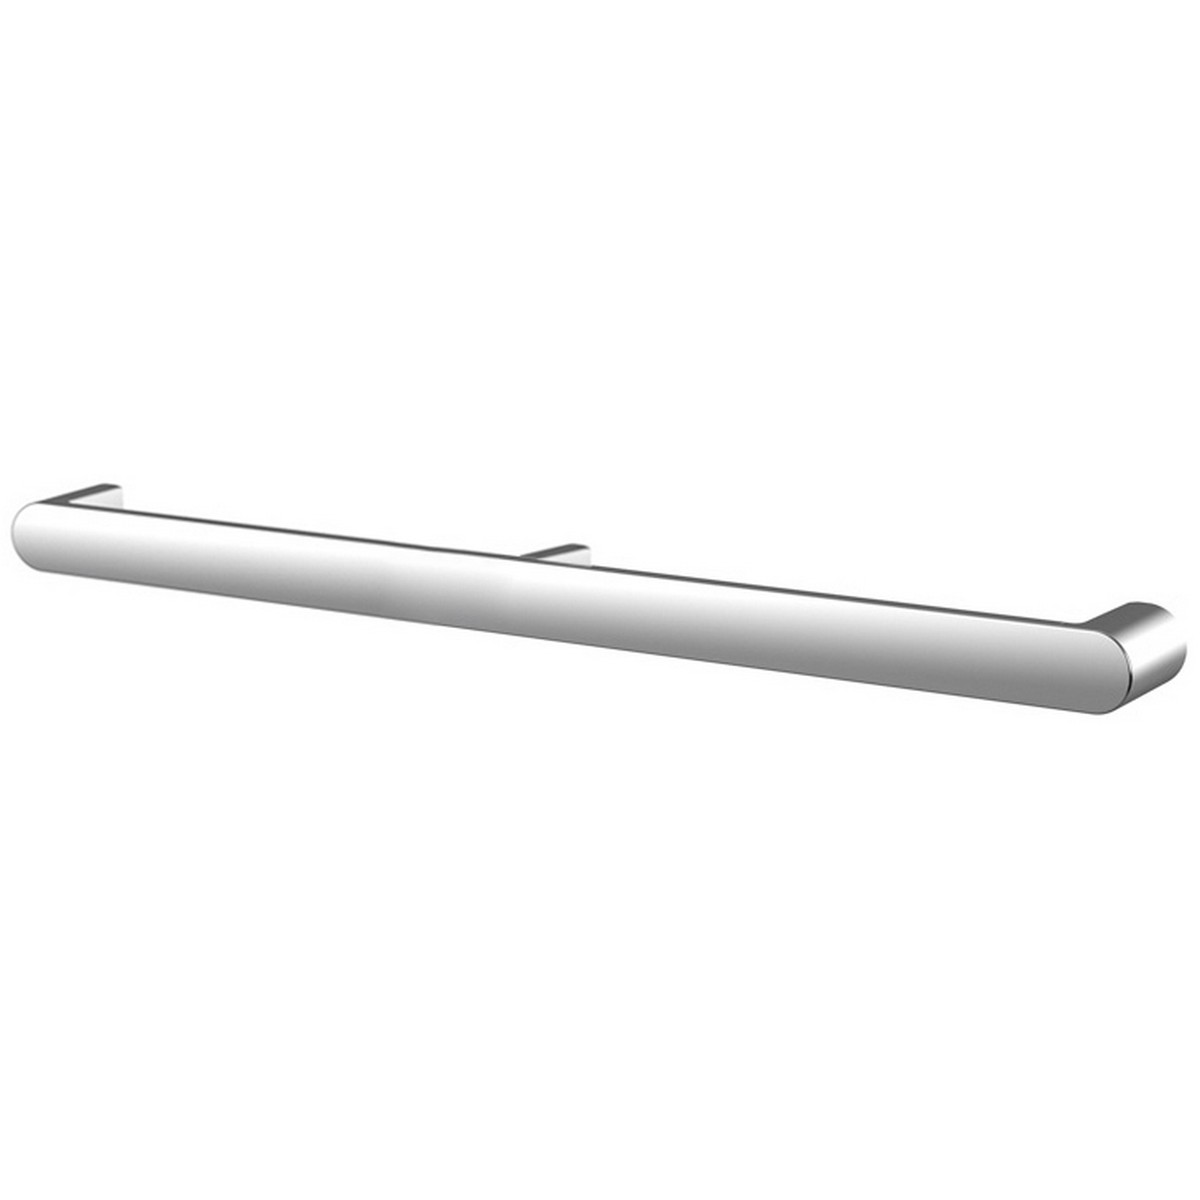 KEUCO 31601011000 ELEGANCE 40 1/2 INCH WALL MOUNTED SUPPORT RAIL IN POLISHED CHROME